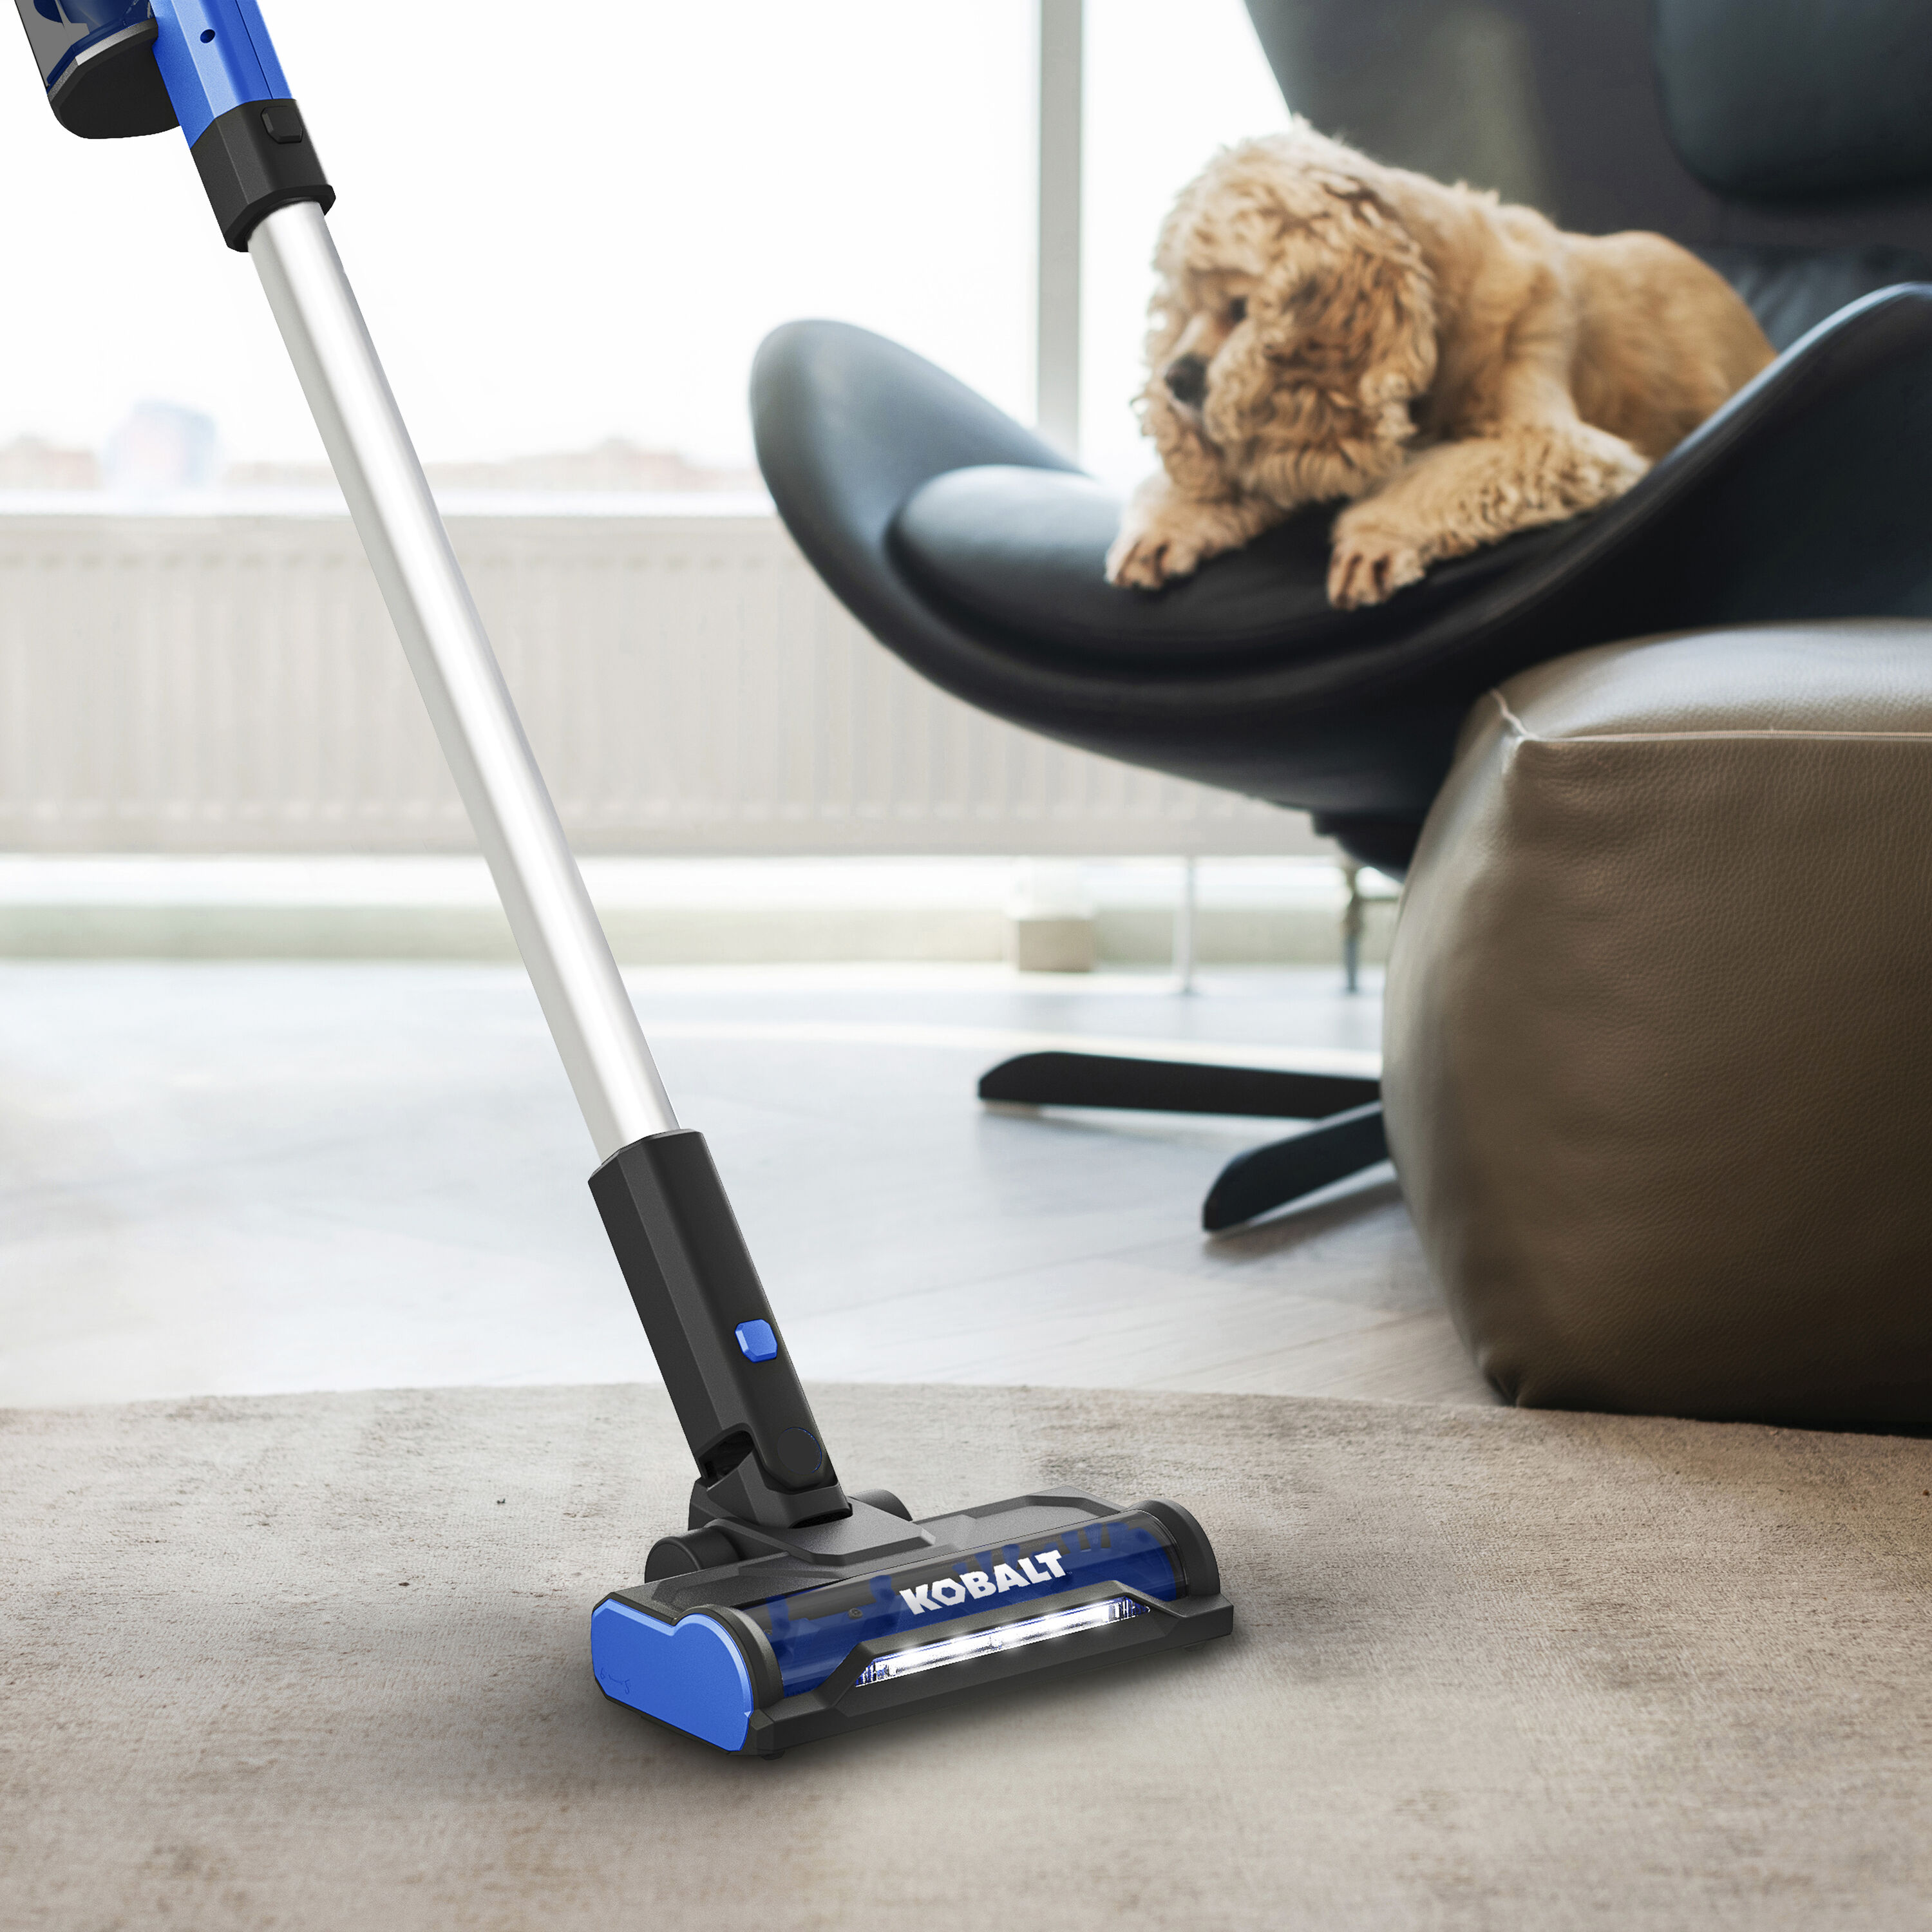 Lowe's Exclusive Stick Vacuums at